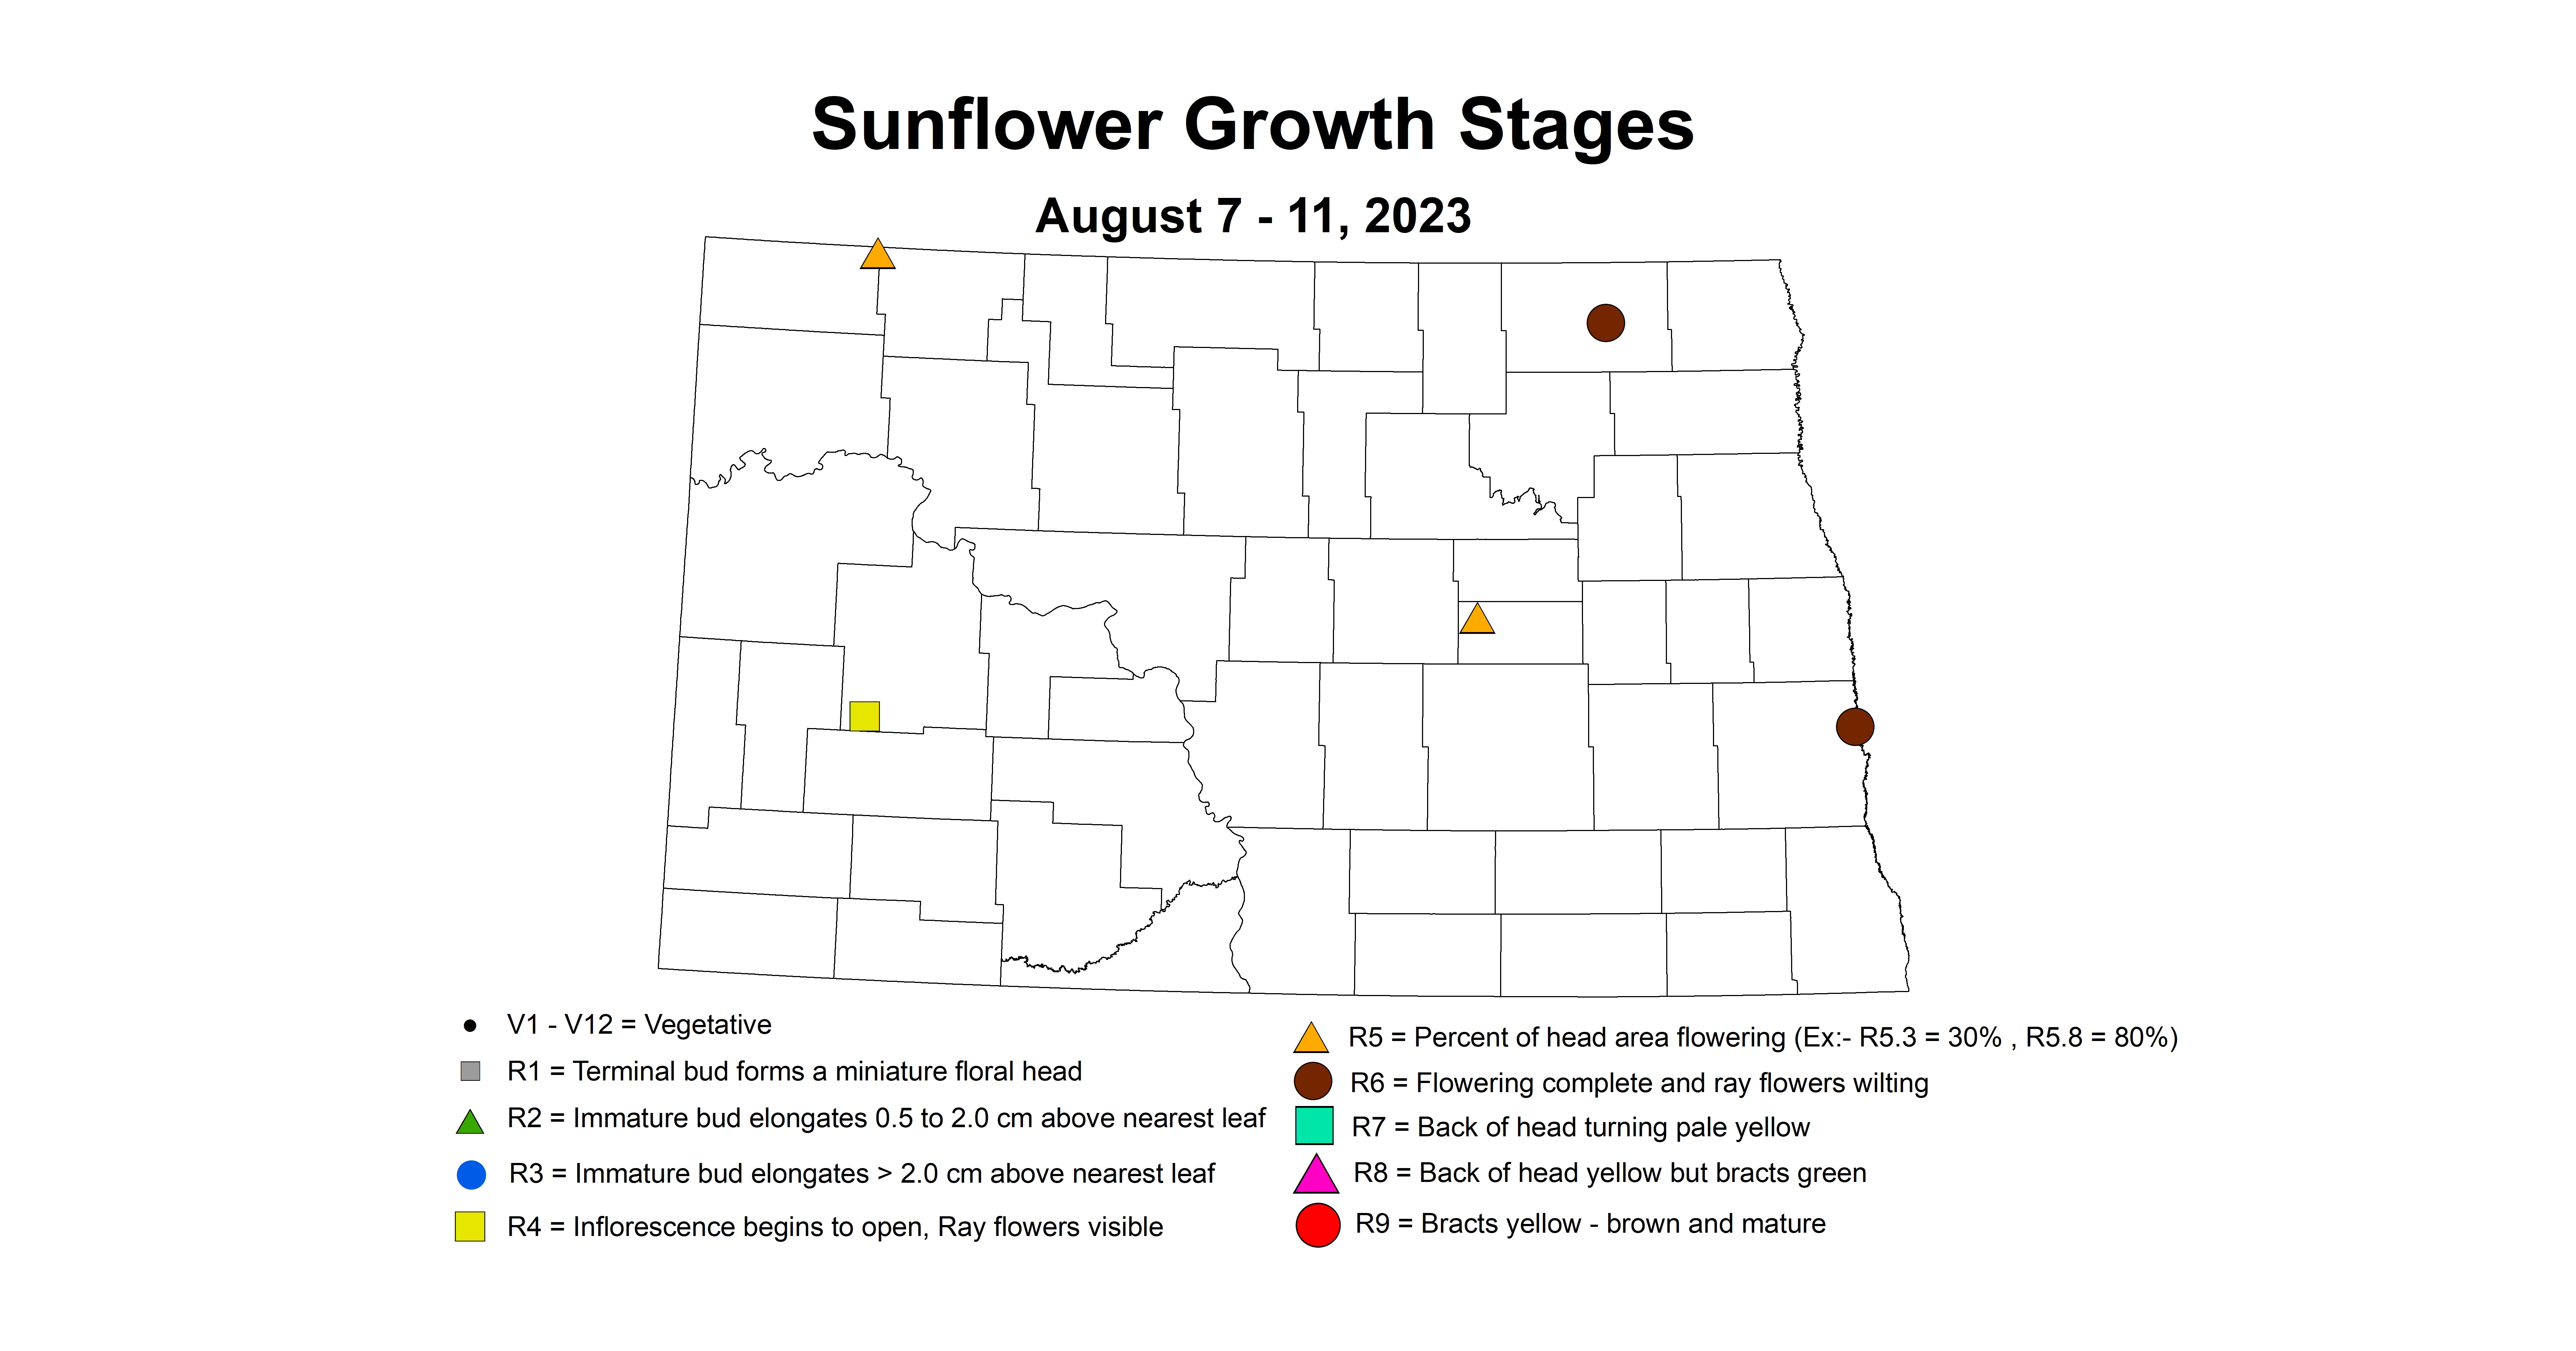 sunflower growth stages 8.7-8.11 2023